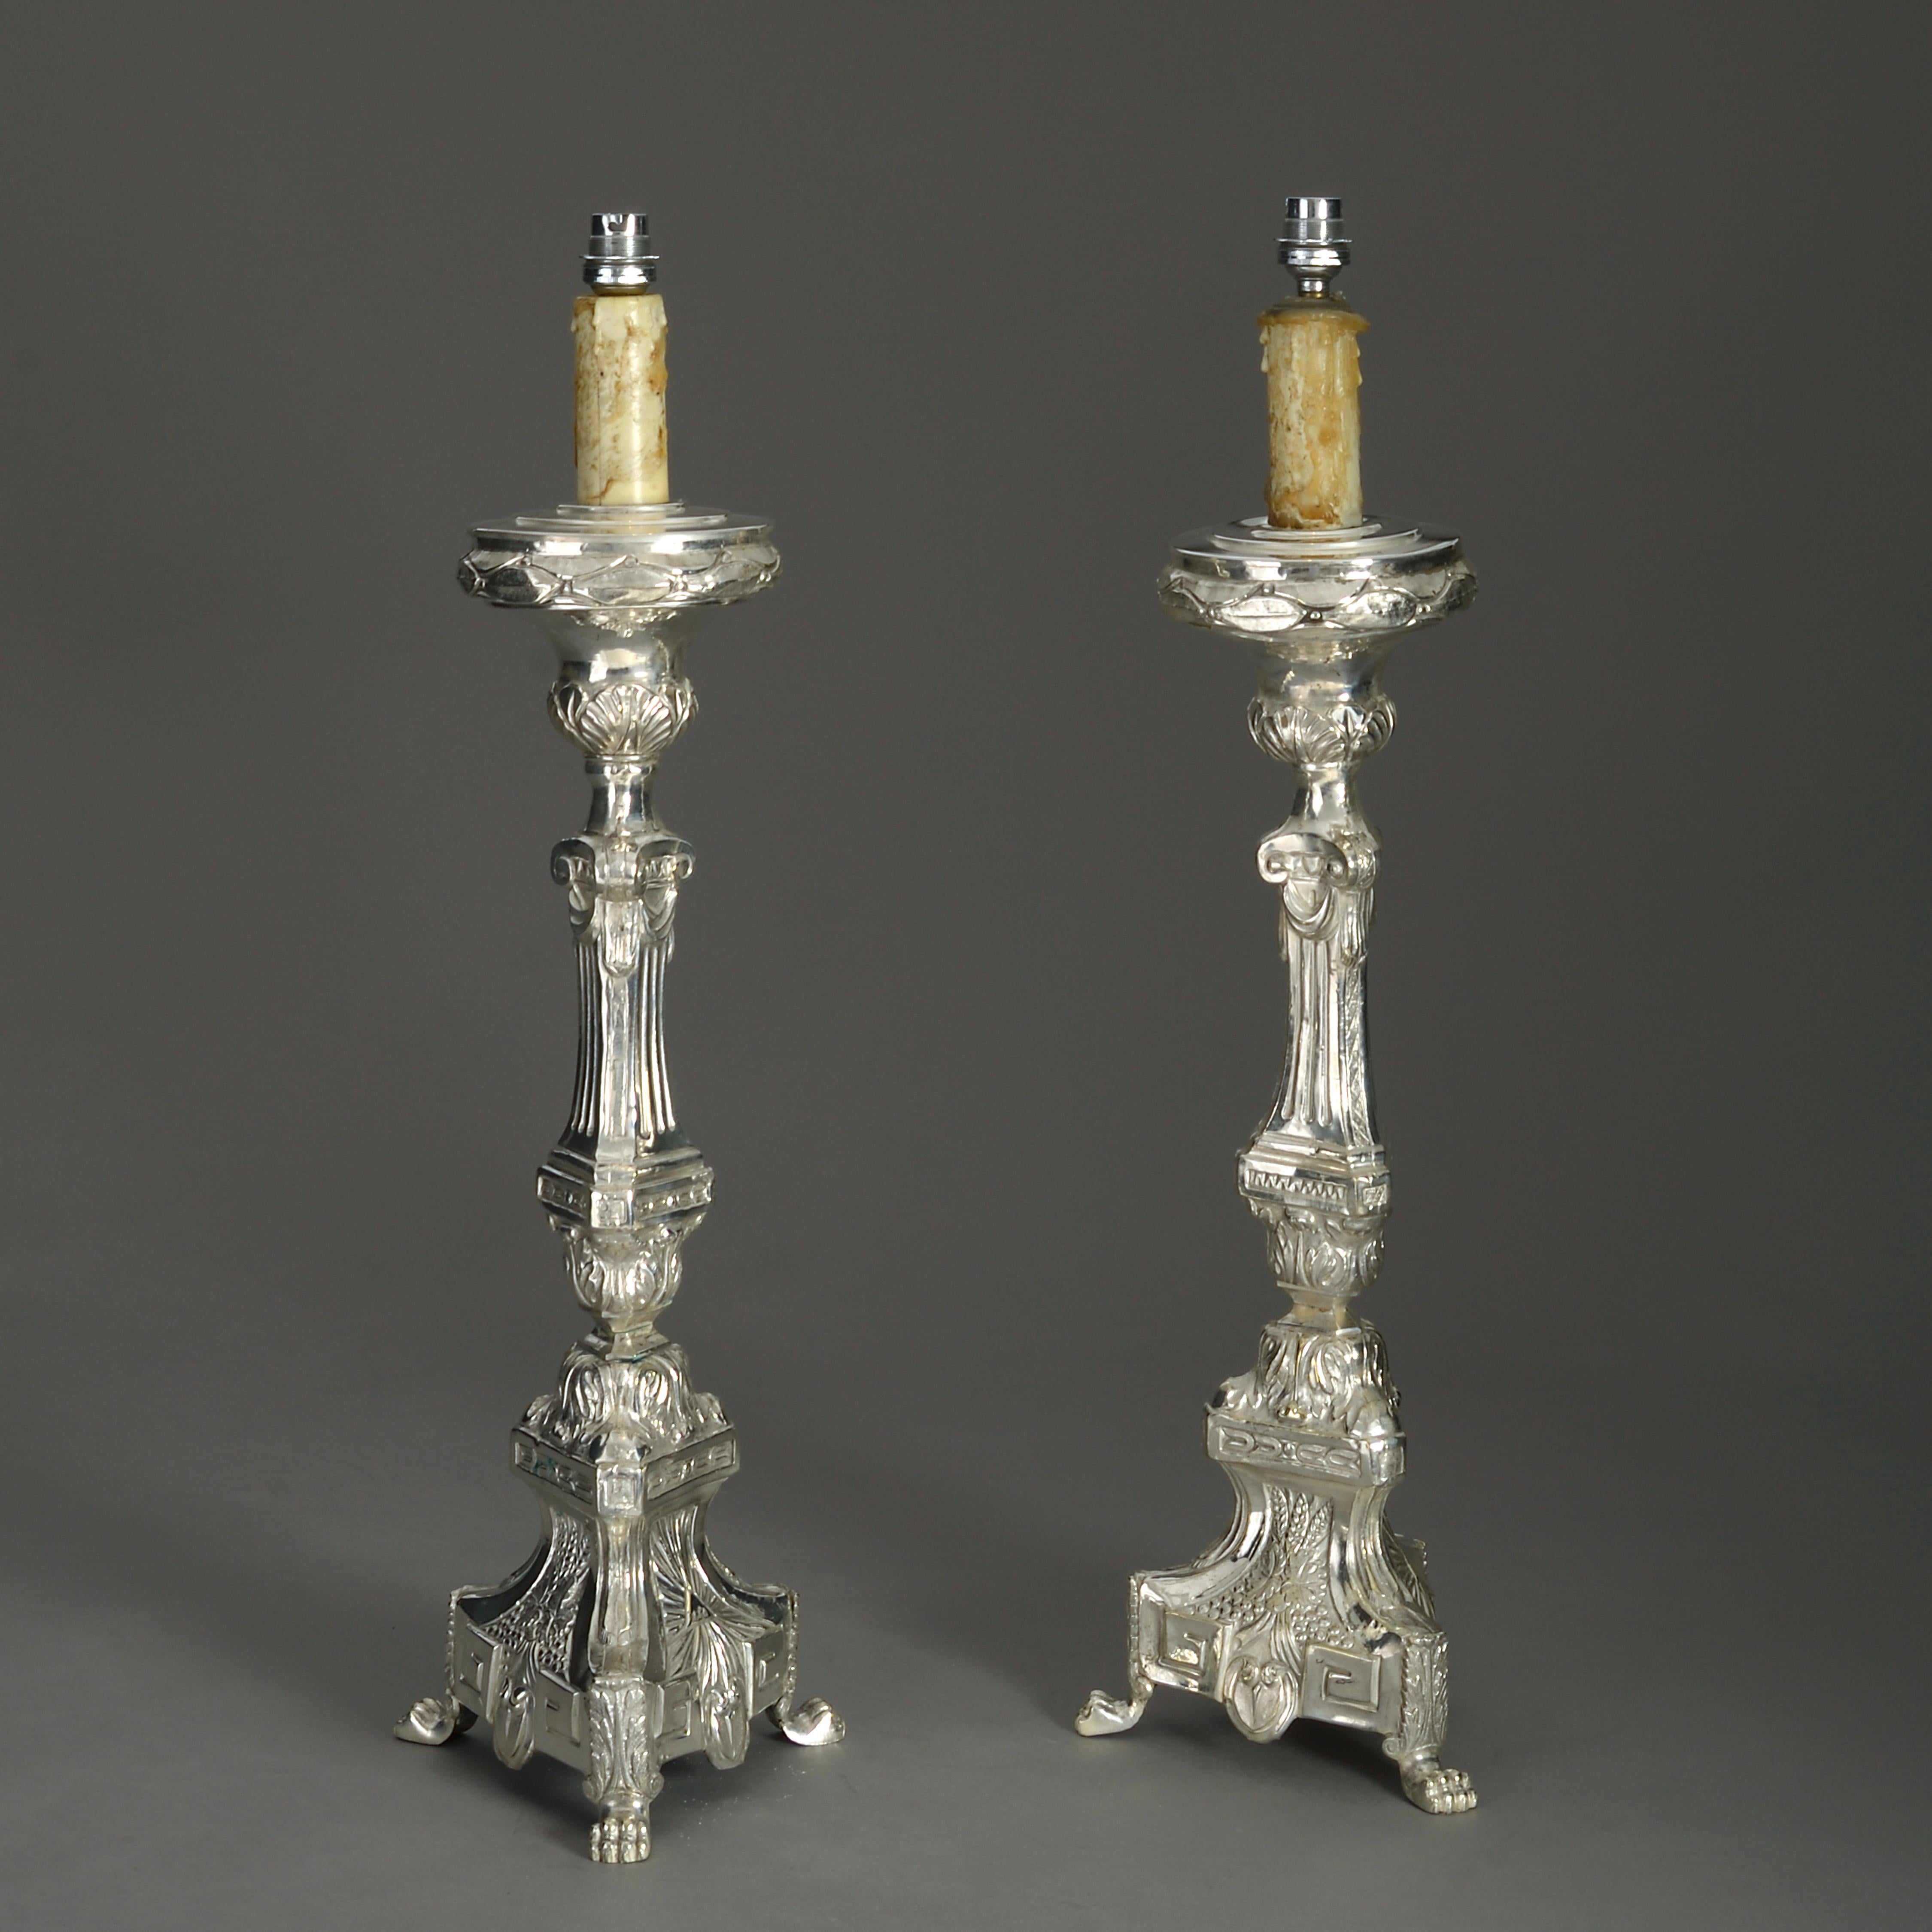 A tall pair of 19th century silver plated pressed metal candlestick lamps in the Baroque manner, now mounted as table lamps.

Wired for electric lighting according to UK safety standards.

This piece can be rewired for US, EU and worldwide